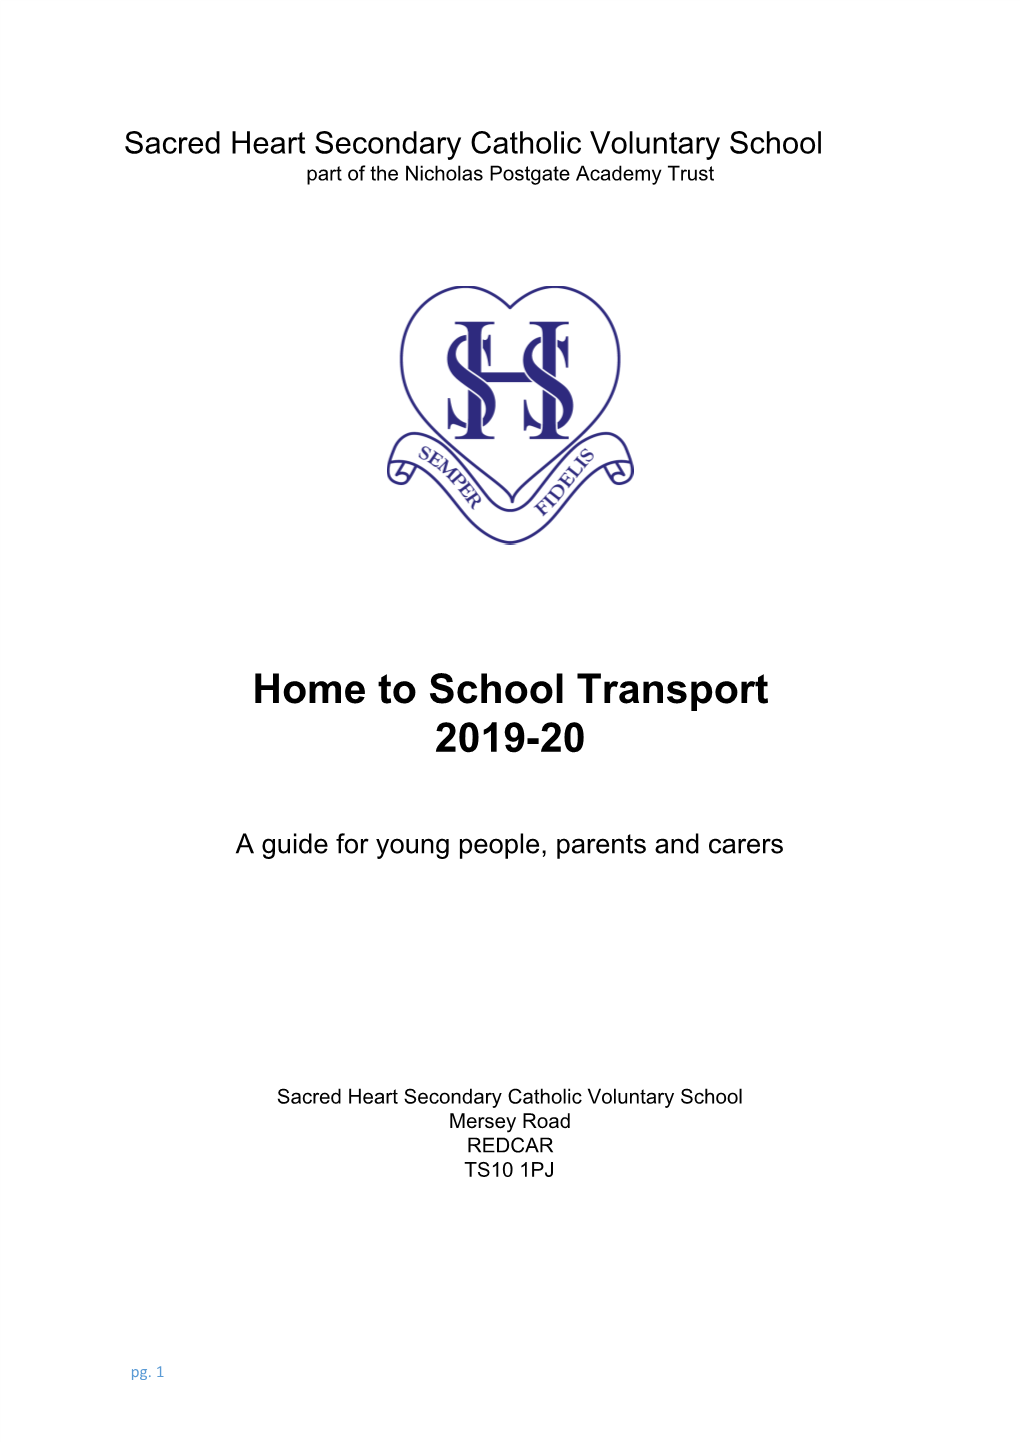 Home to School Transport 2019-20